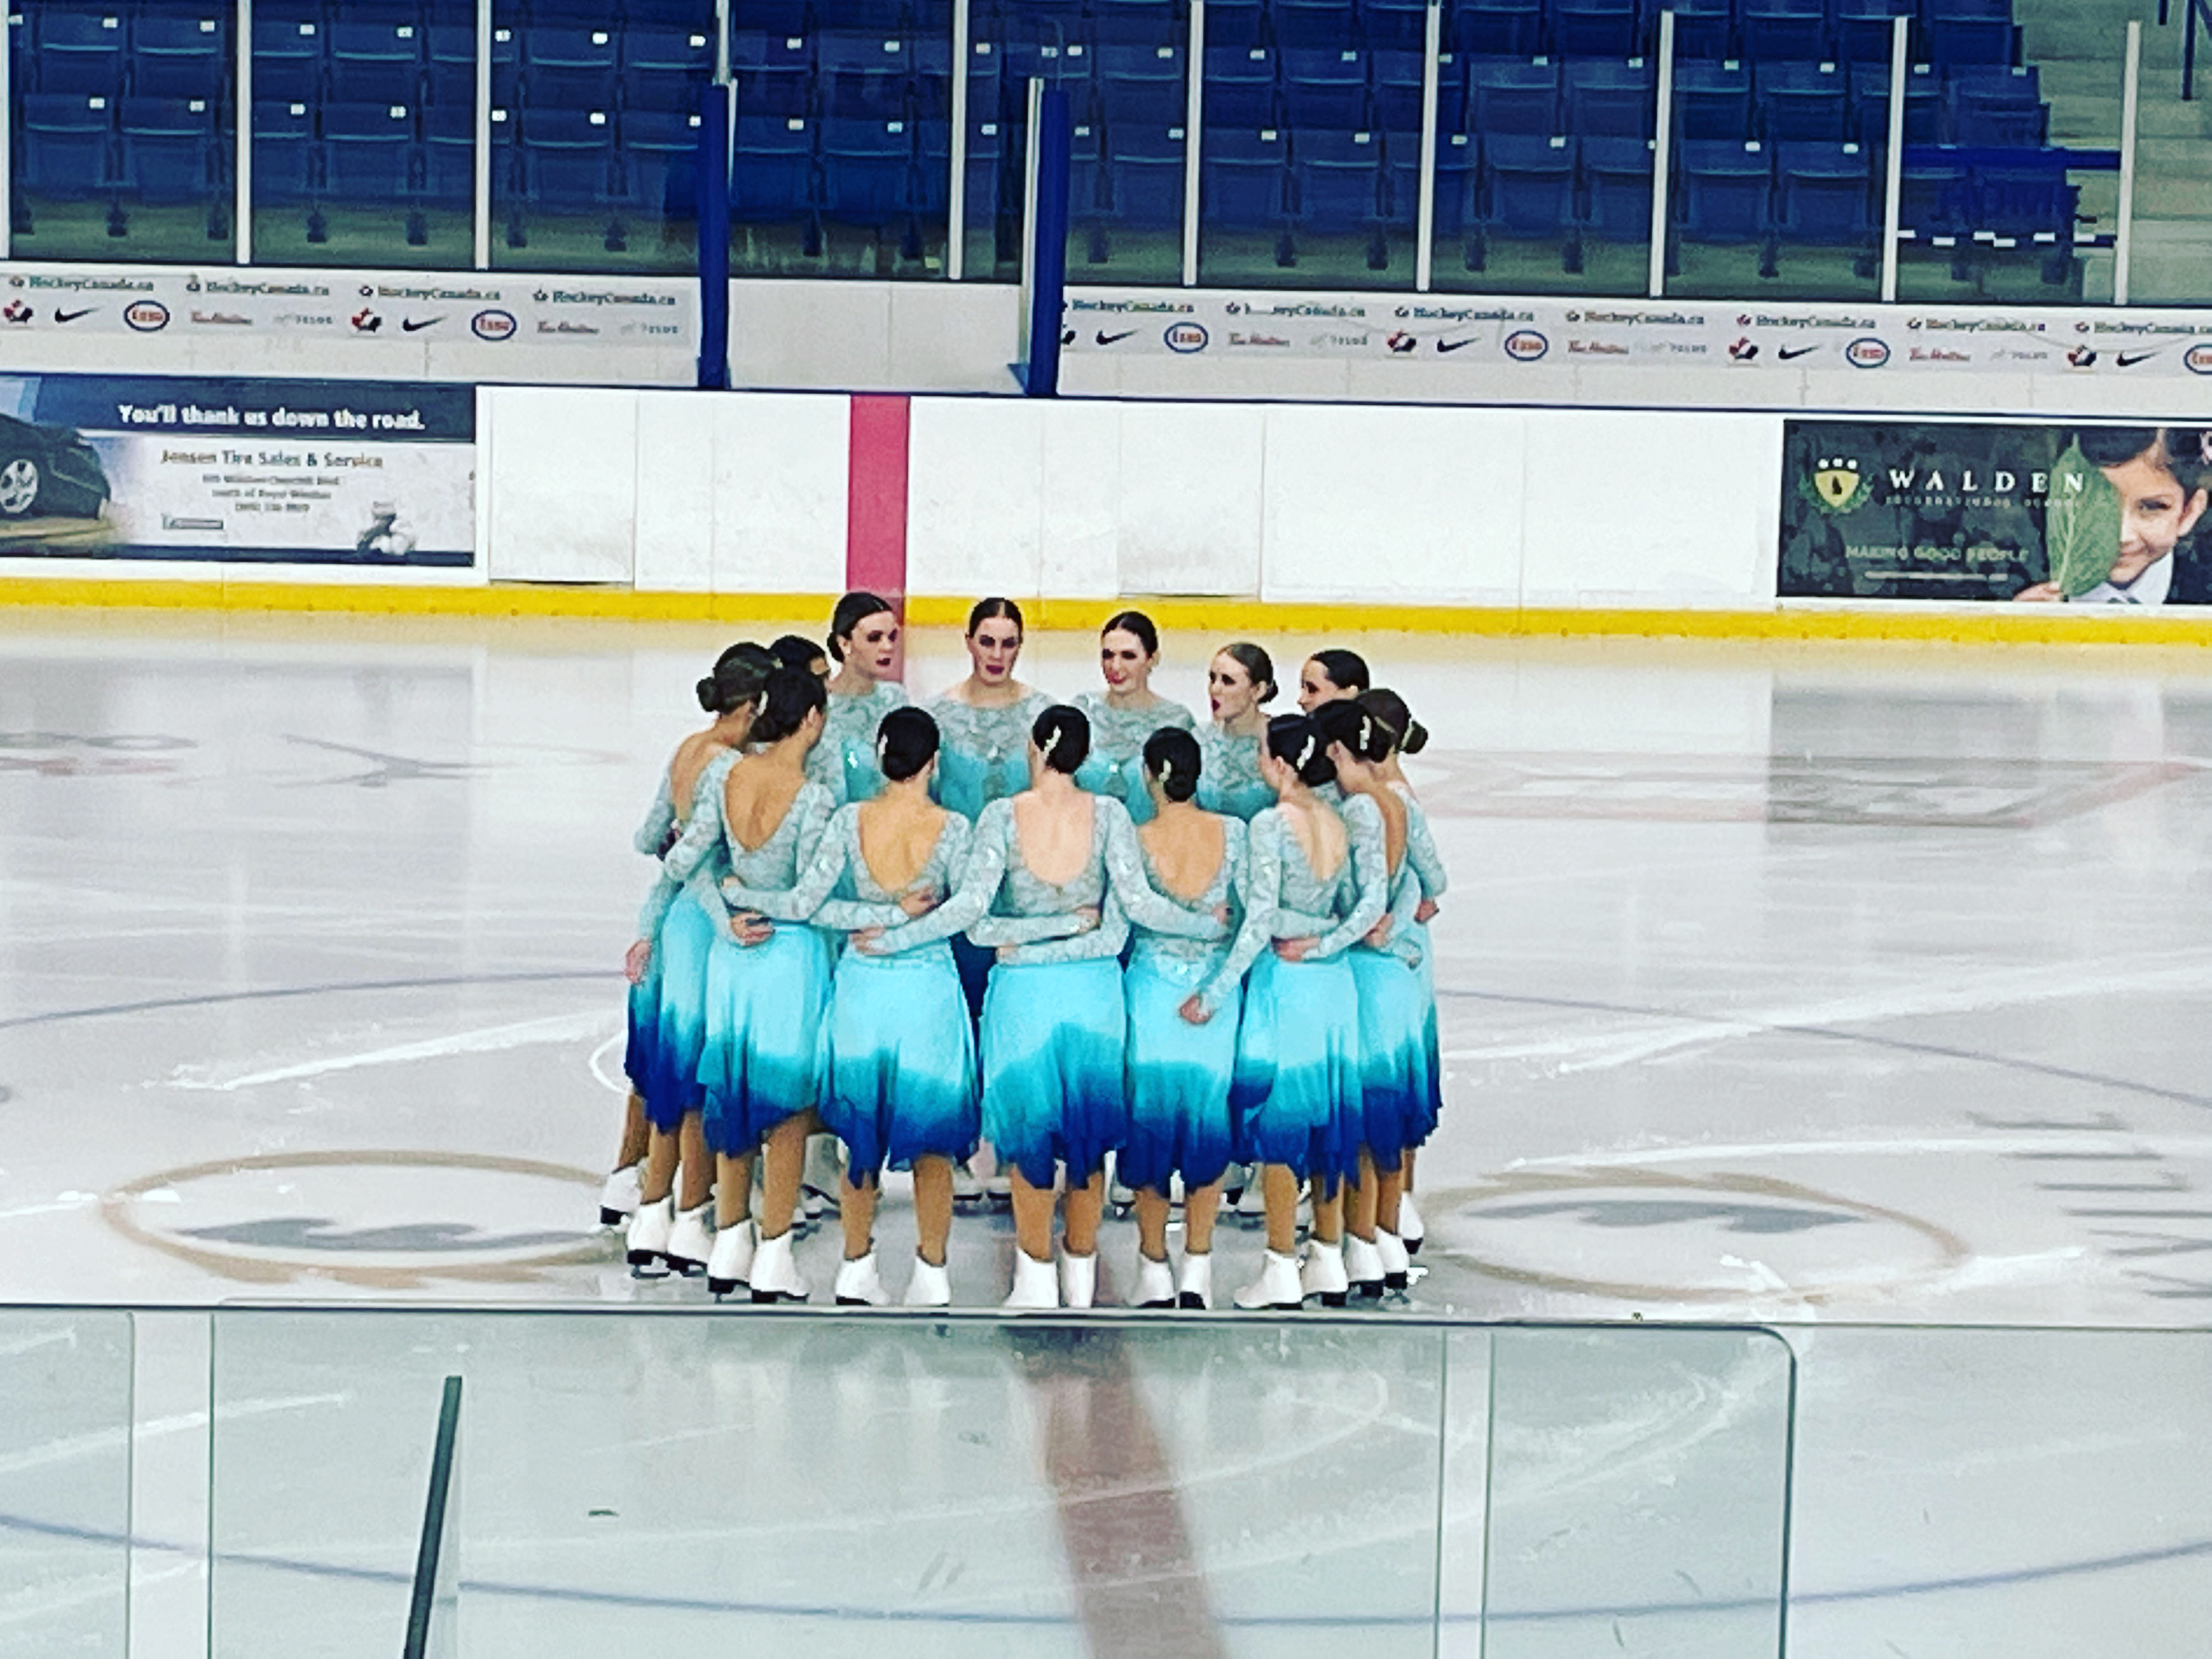 At centre ice, Regionals competition